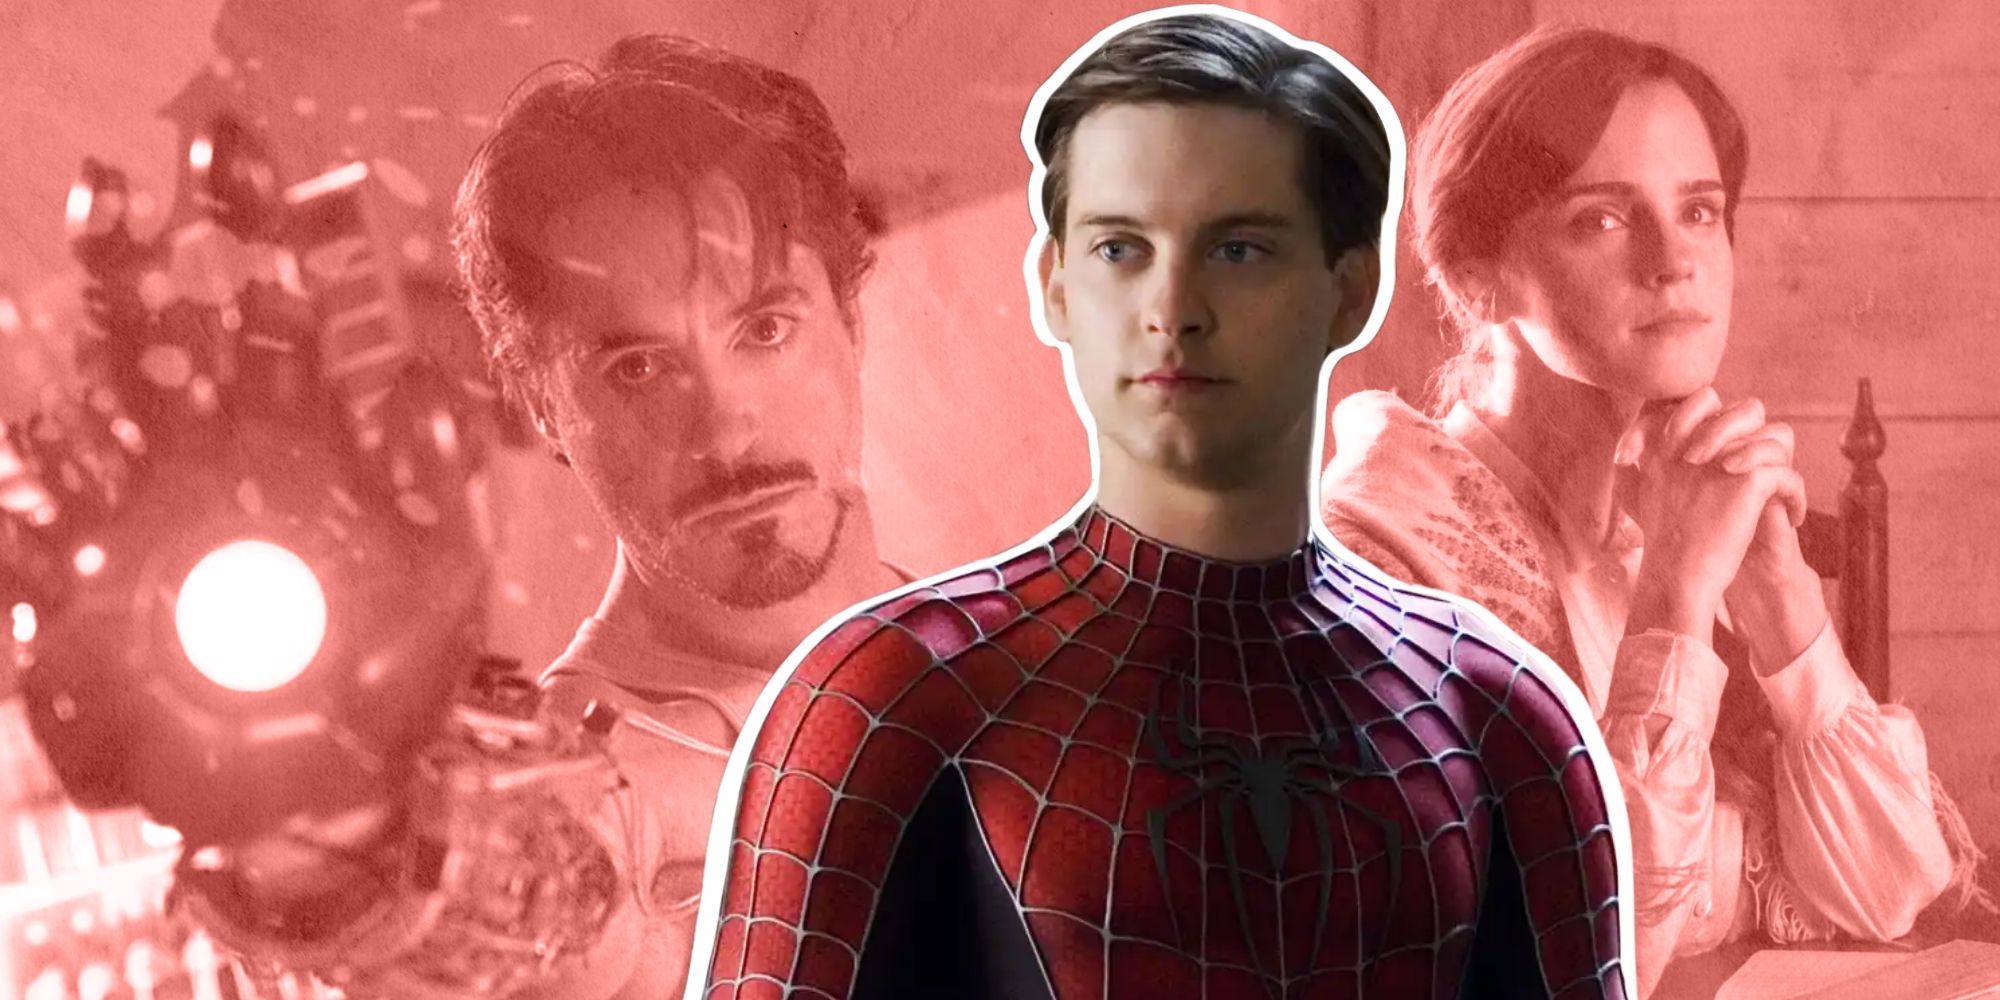 Tobey Maguire as Spider-Man pictured alongside Robert Downey Jr. as Iron Man and Emma Watson from 'Little Women' (2019)